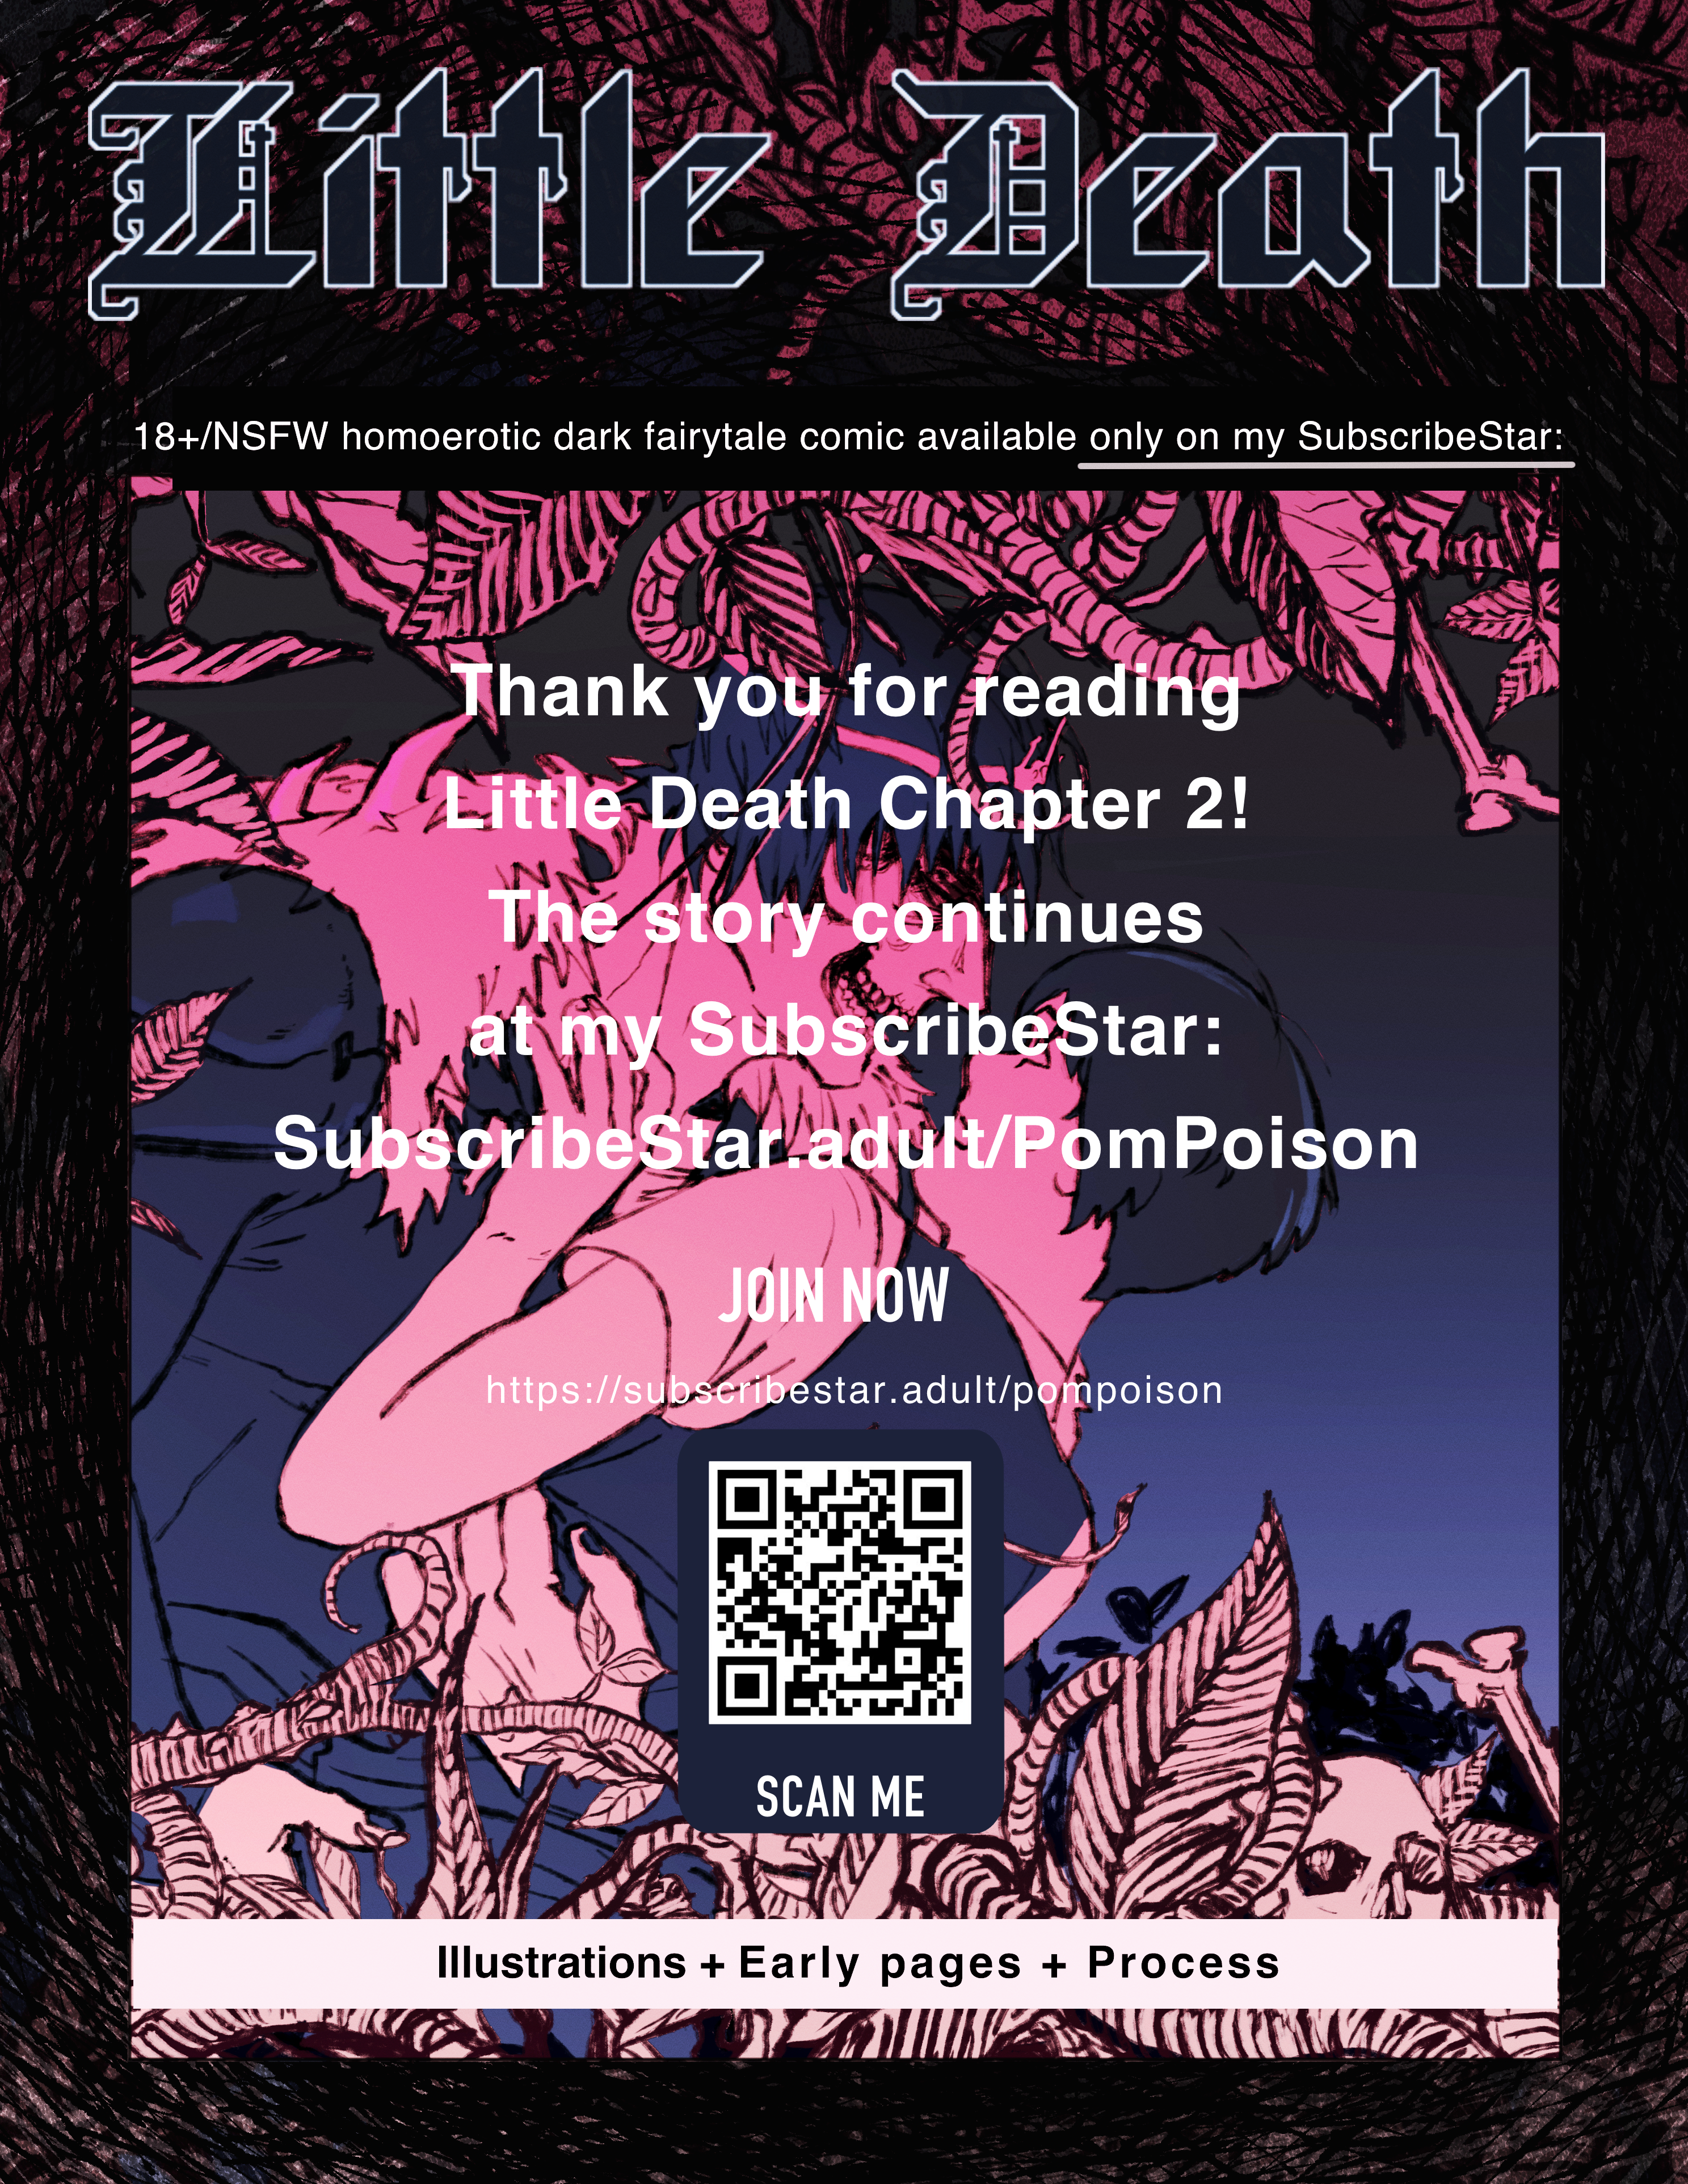 SubscribeStar.adult Table Ad for Little Death